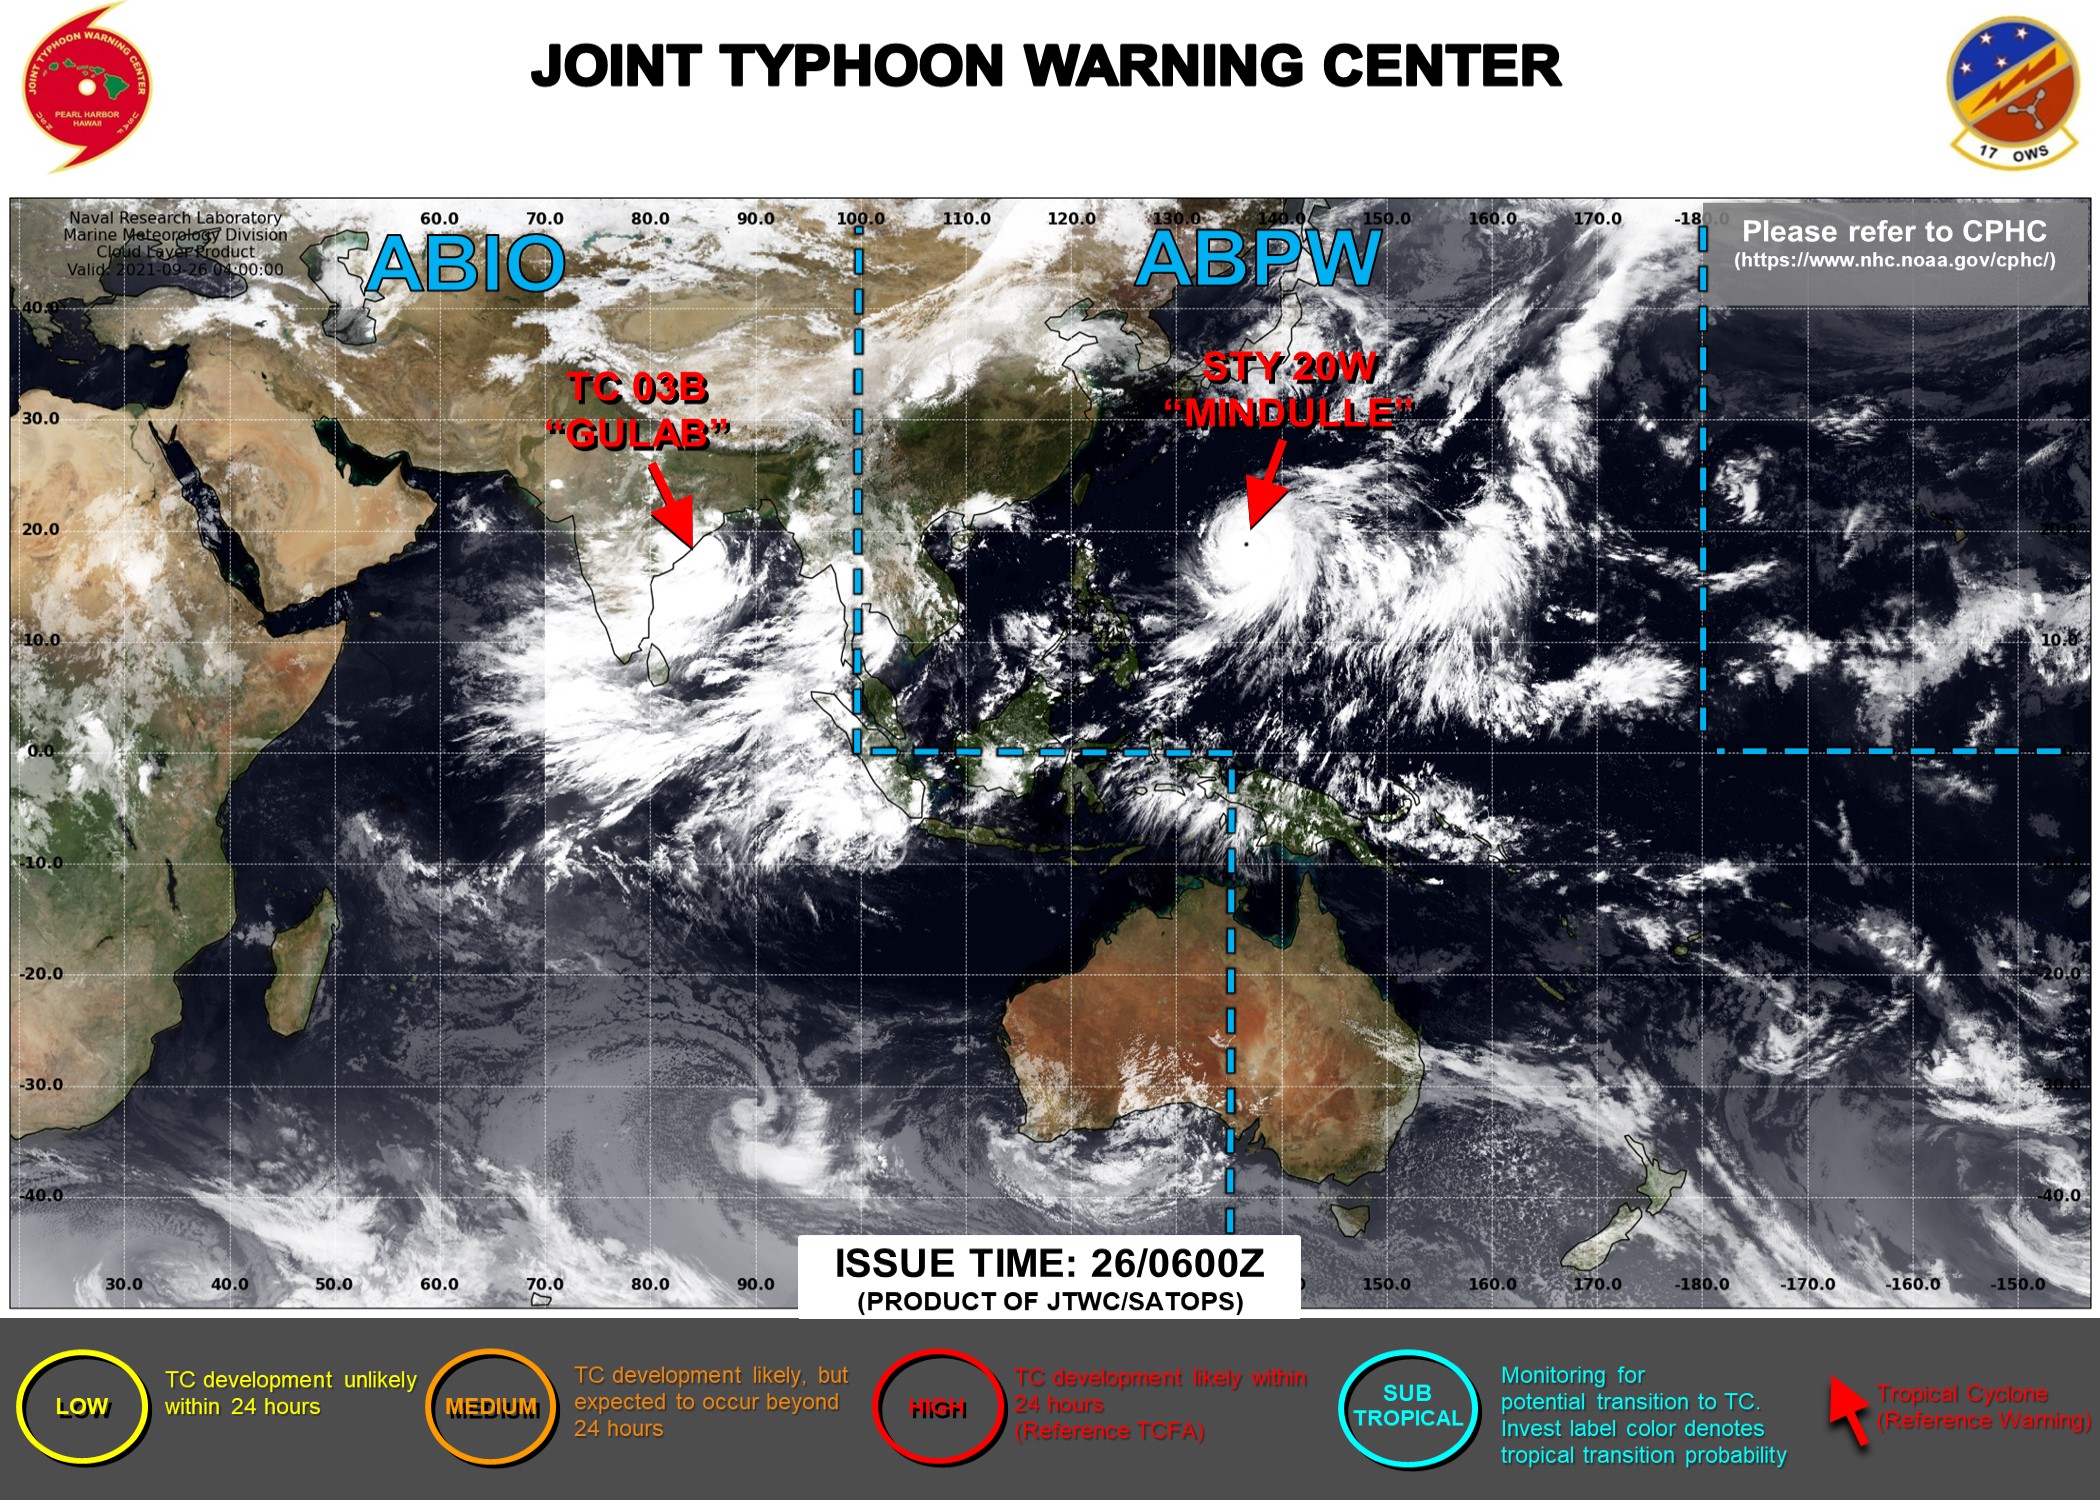 JTWC IS ISSUING 6HOURLY WARNINGS AND 3HOURLY SATELLITE BULLEINTS ON BOTH 20W AND 03B.